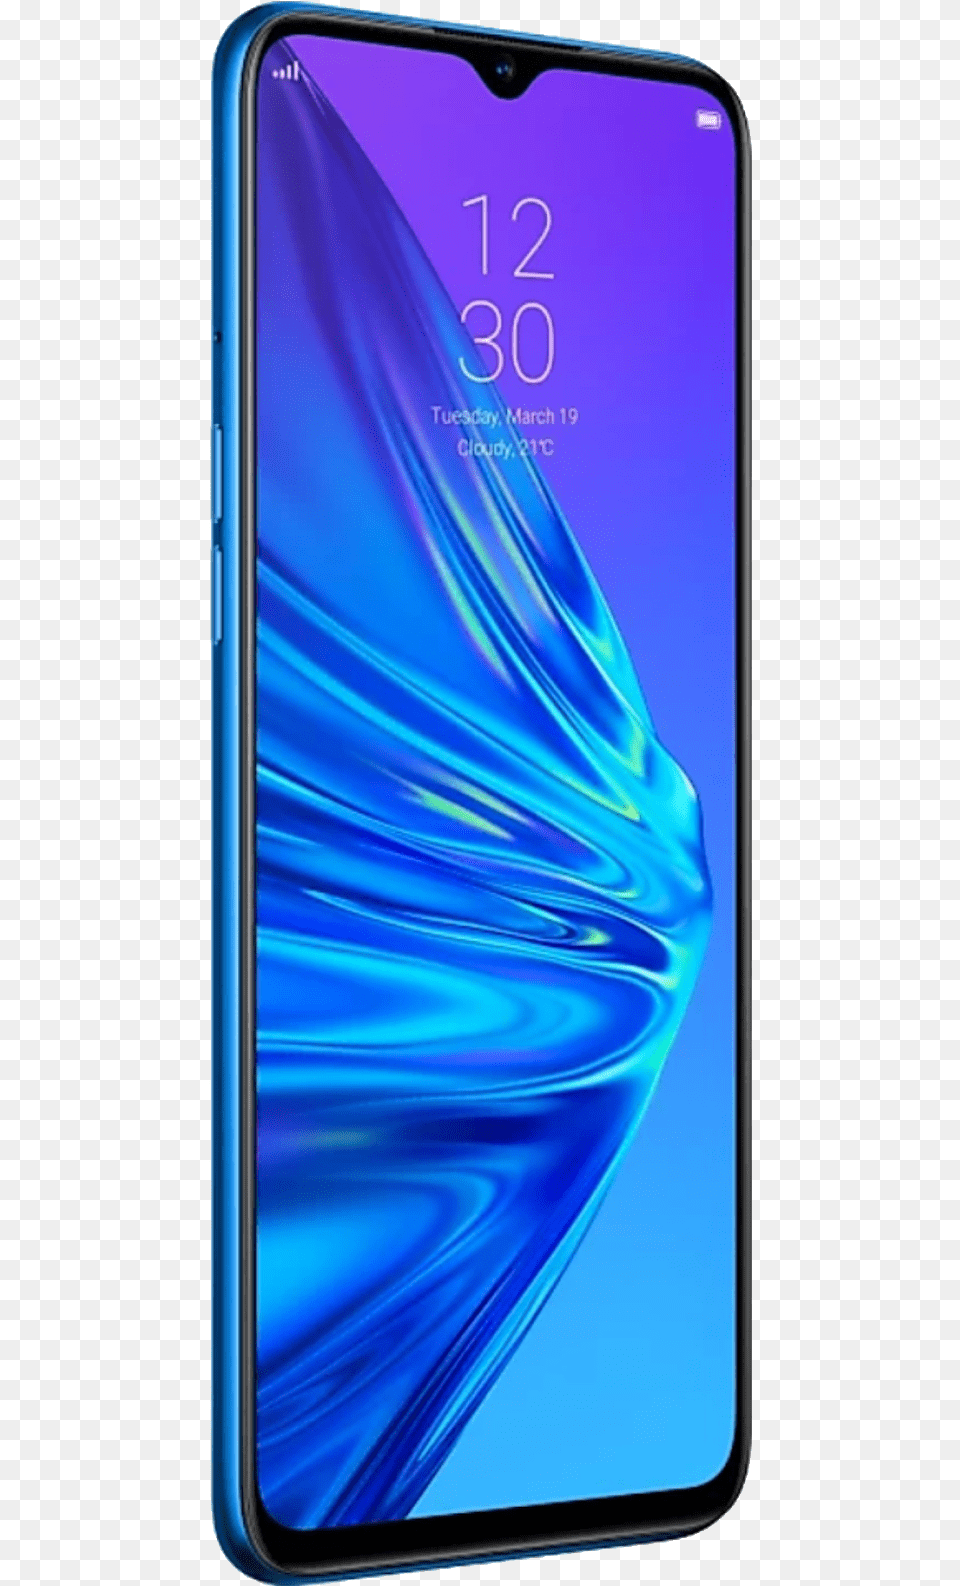 Oppo Realme 5 Pro, Electronics, Mobile Phone, Phone Png Image